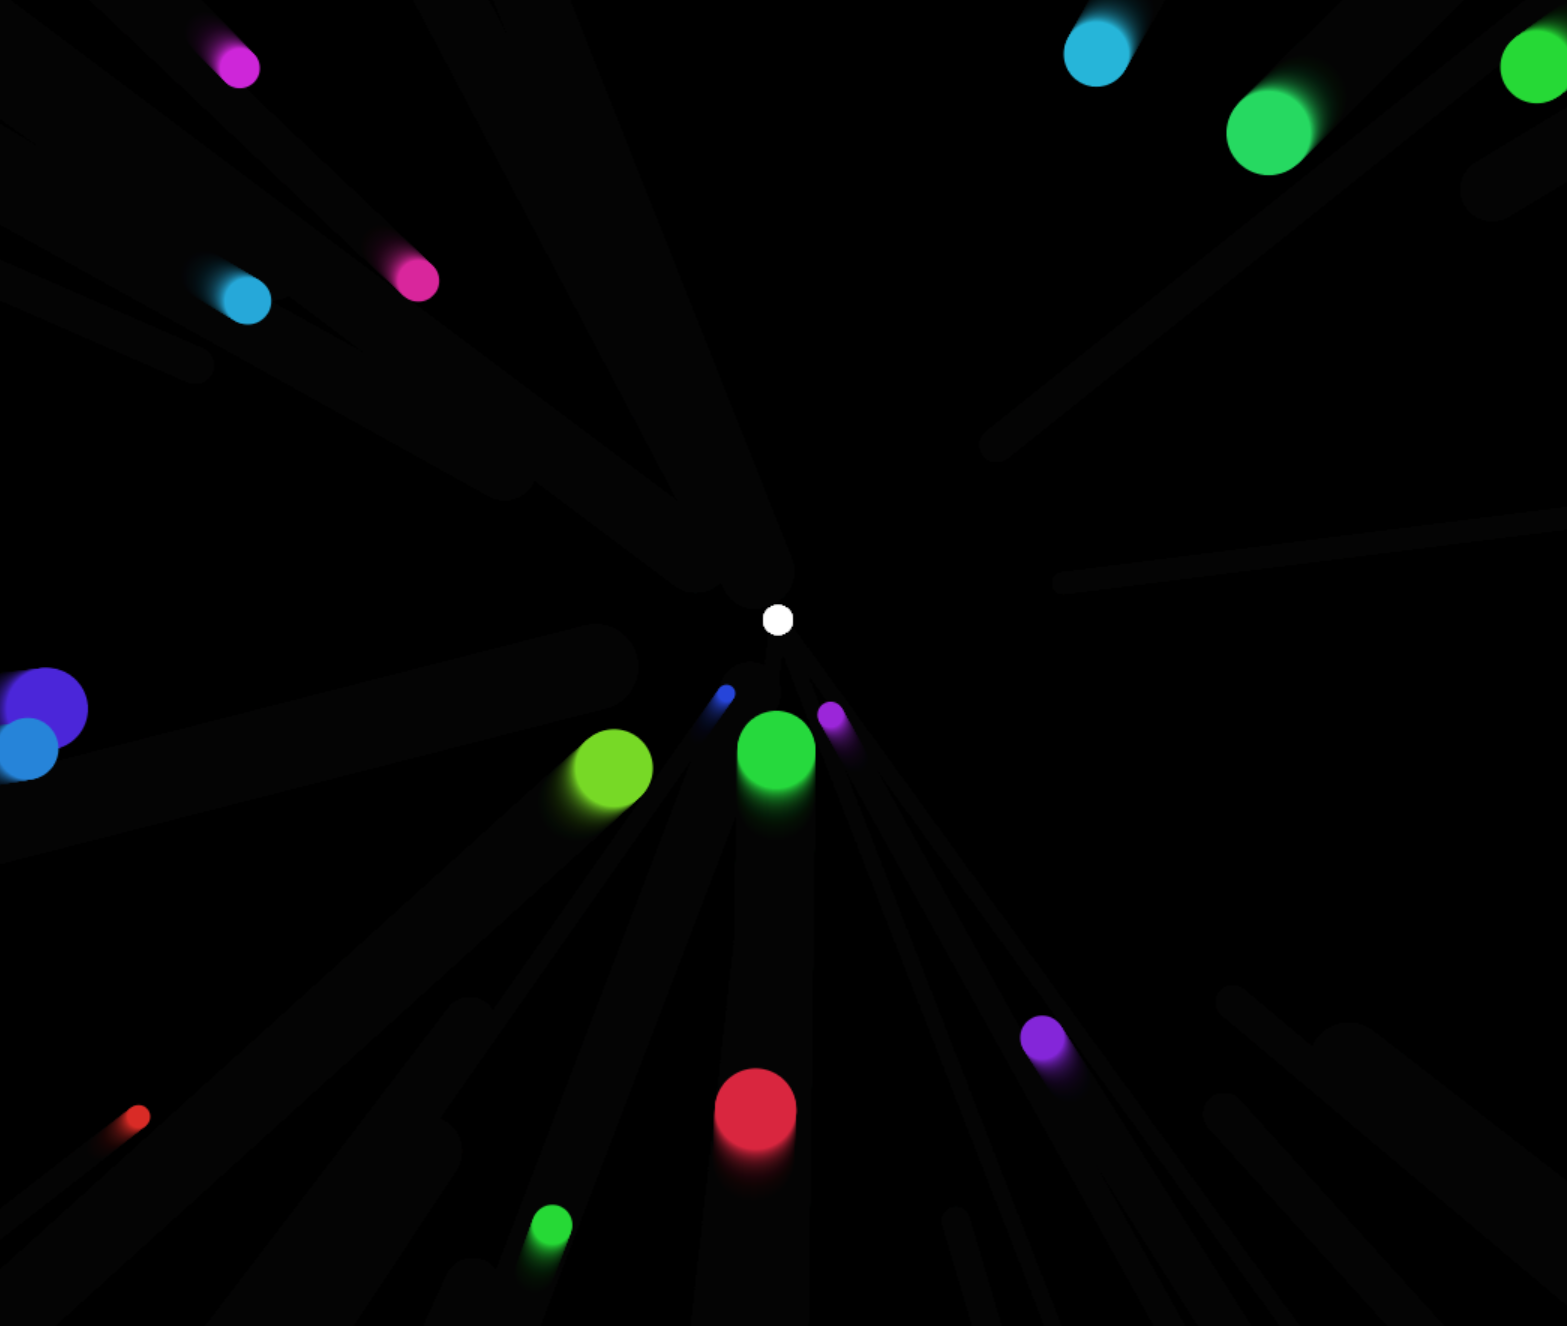 A screenshot of gameplay from the AsterBalls game